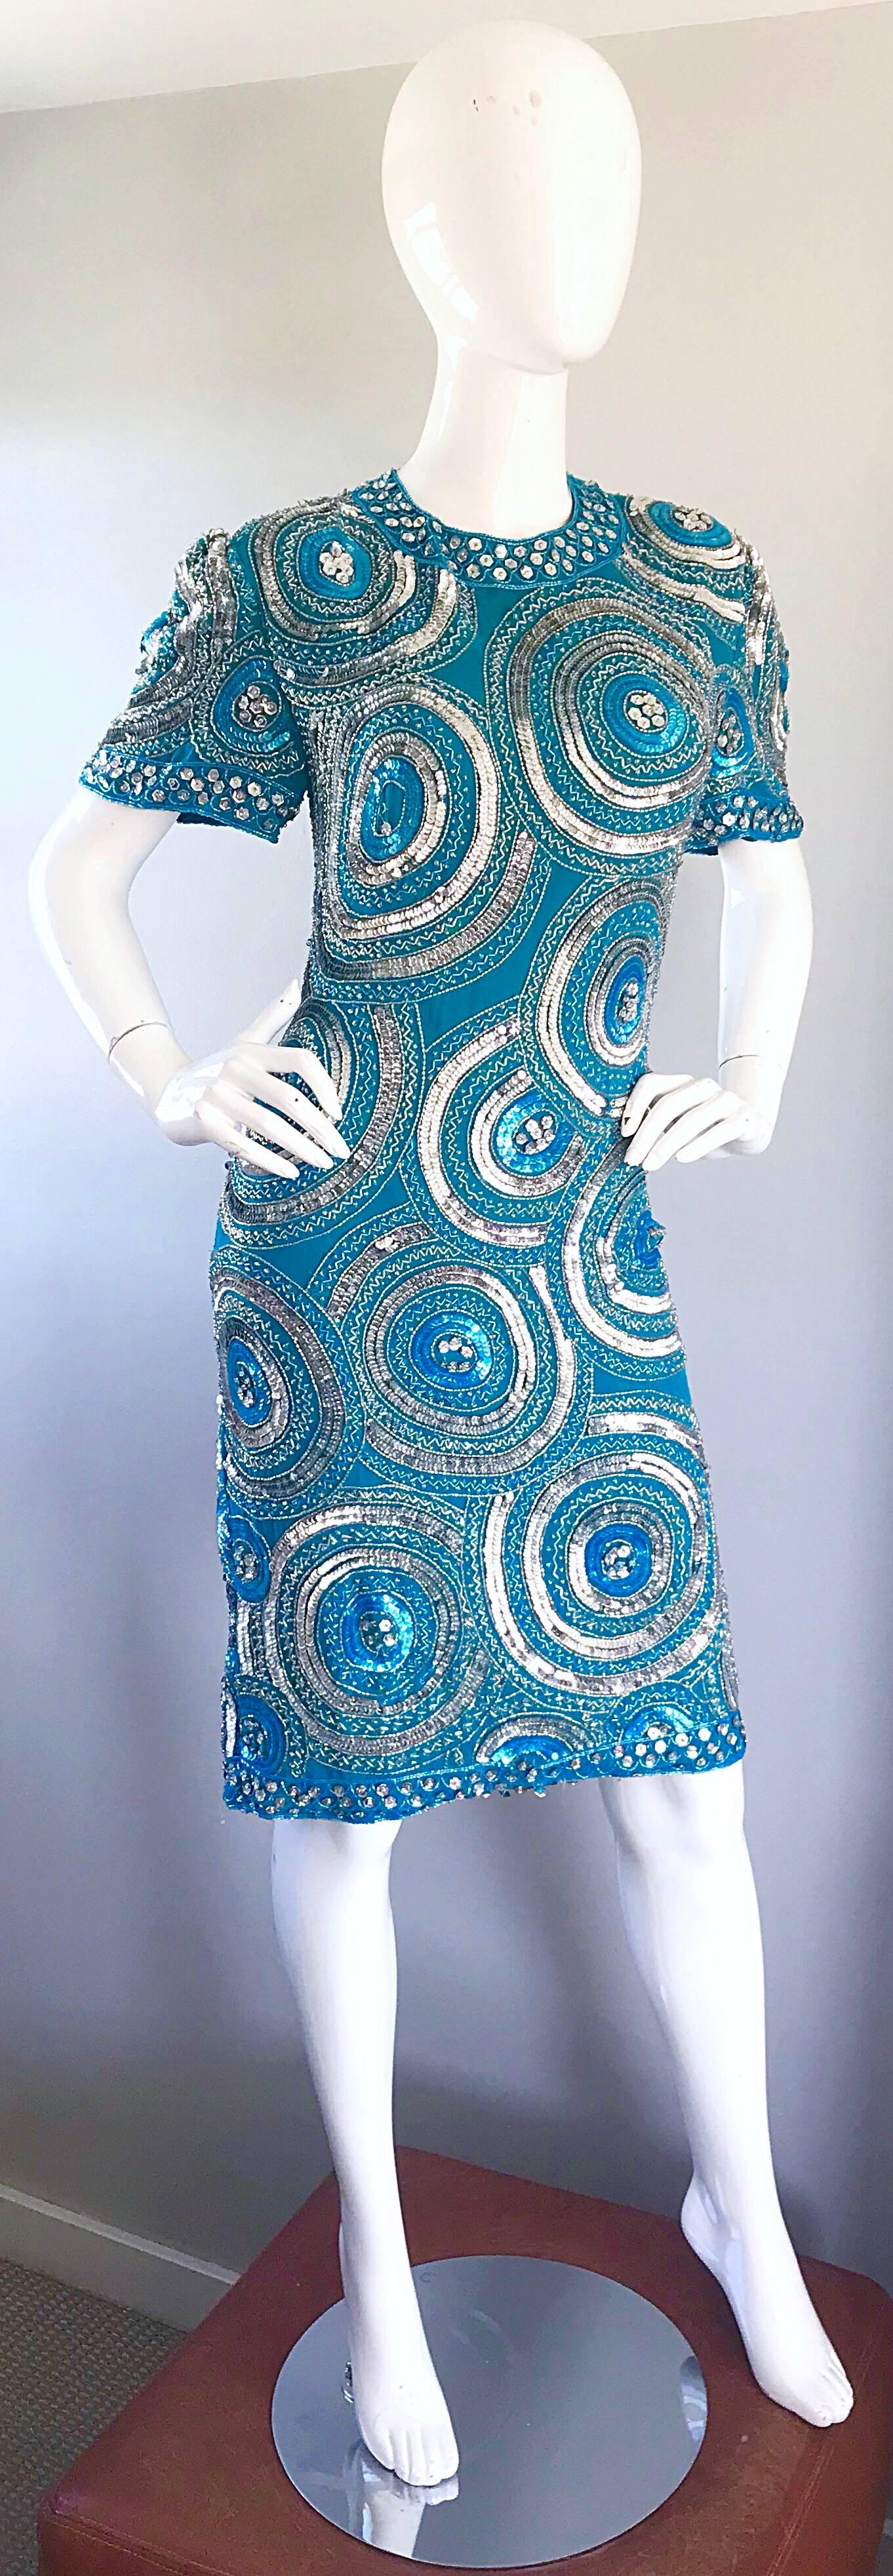 Size 10 / 12 Vintage 1990s Turquoise Blue + Silver Sequined Open Back 90s Dress 2